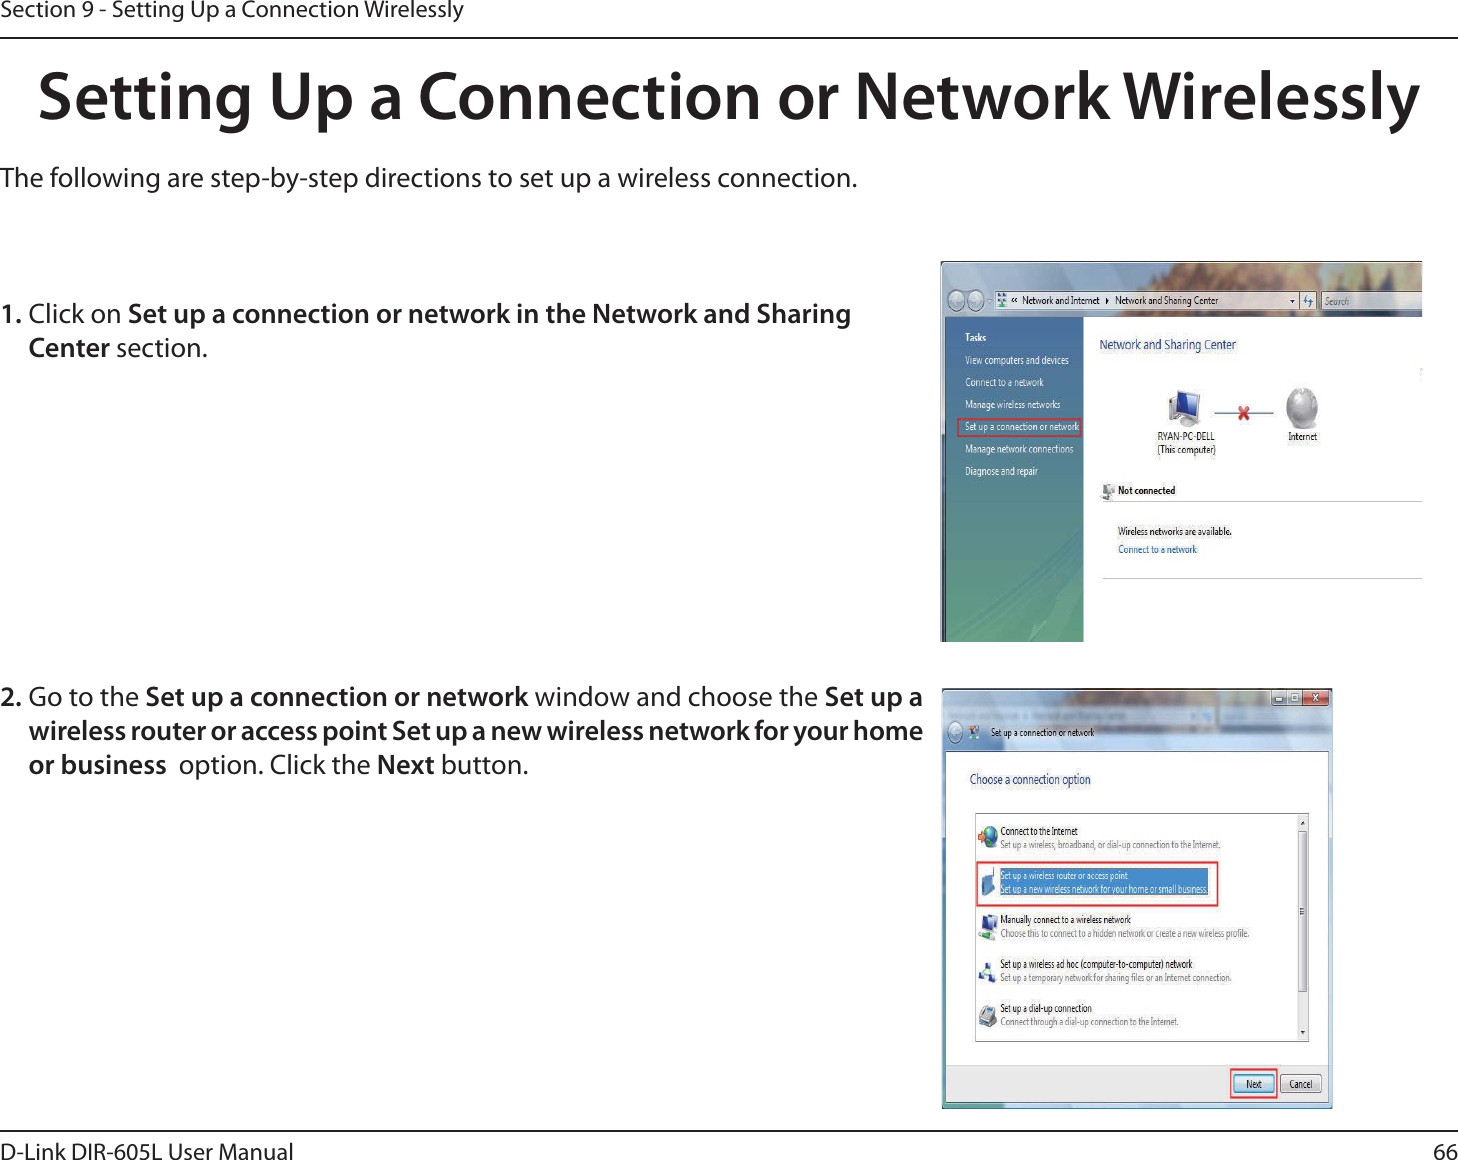 66D-Link DIR-605L User ManualSection 9 - Setting Up a Connection WirelesslySetting Up a Connection or Network WirelesslyThe following are step-by-step directions to set up a wireless connection.2. Go to the Set up a connection or network window and choose the Set up a wireless router or access point Set up a new wireless network for your home or business  option. Click the Next button. 1. Click on Set up a connection or network in the Network and Sharing Center section. 